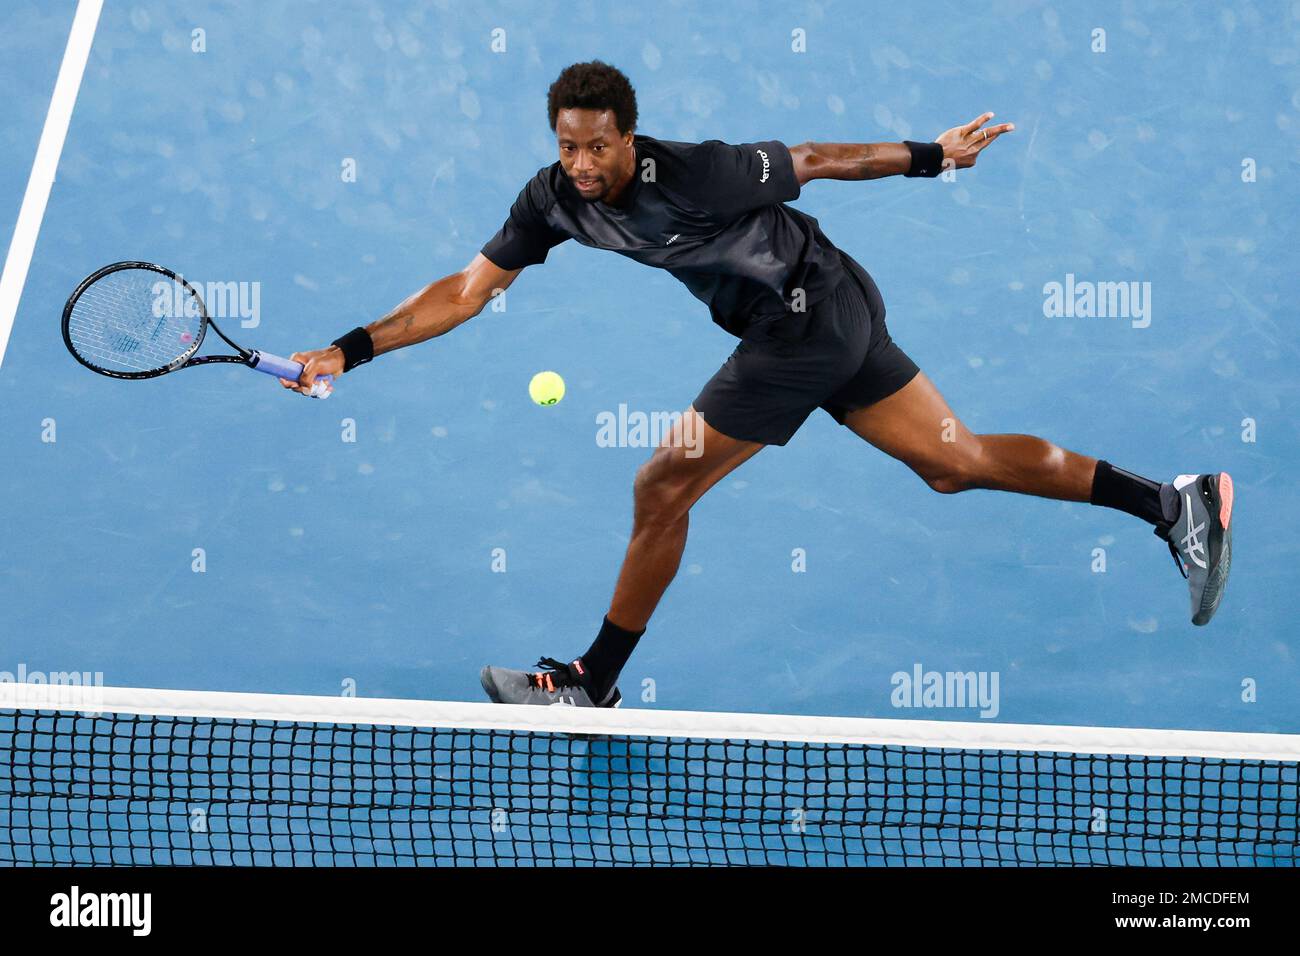 Gael Monfils of France plays a forehand return to Alexander Bublik of Ukraine during their second round match at the Australian Open tennis championships in Melbourne, Australia, Wednesday, Jan